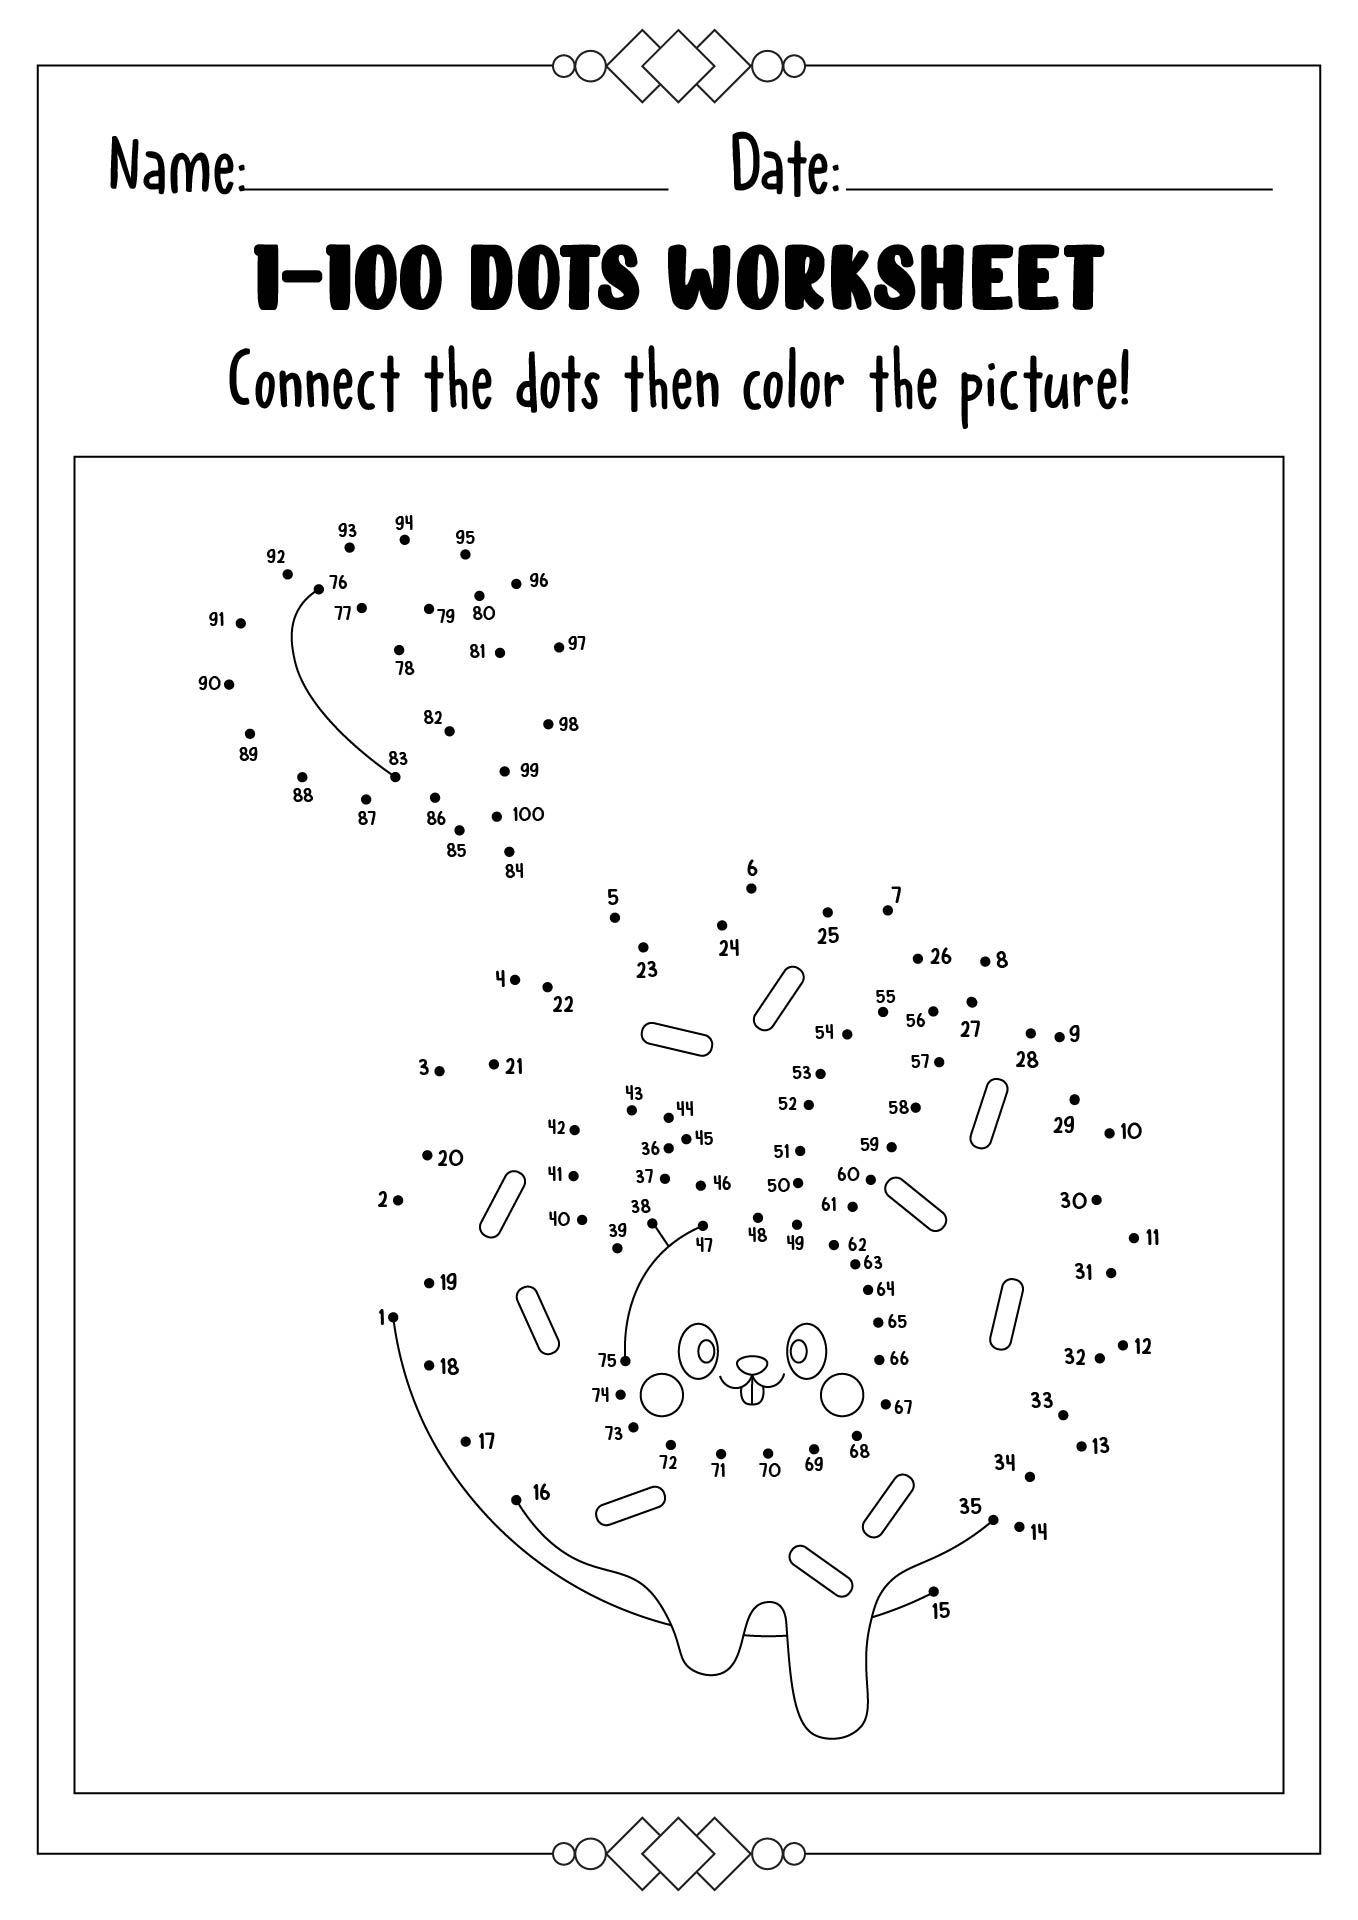 Connect the Dots 1 100 Printable Worksheets Image